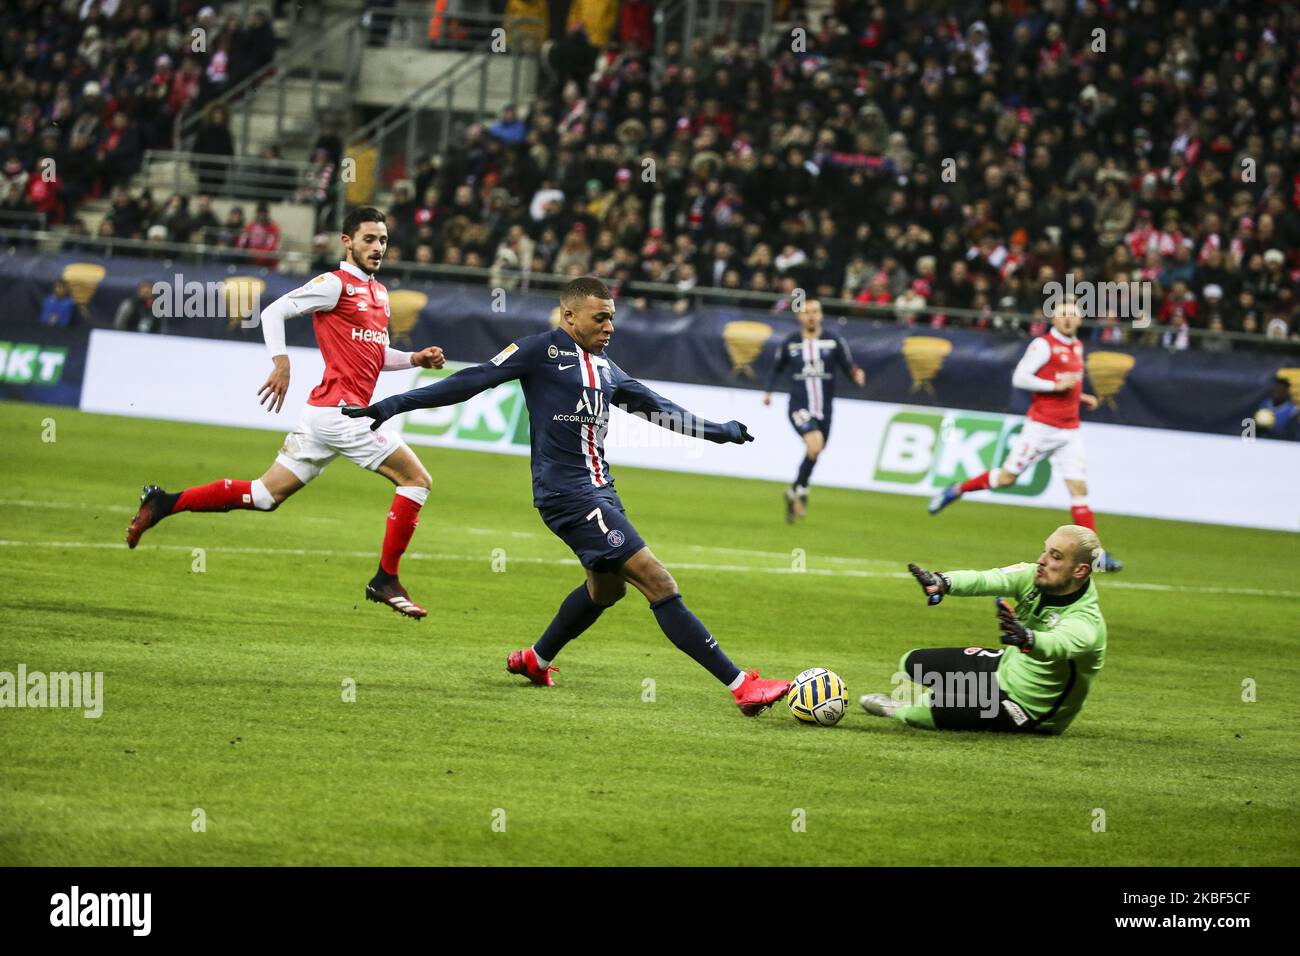 Kylian Mbape and Rajkovic Predrag during the French League Cup semi-final football match between Stade de Reims and Paris Saint-Germain at the Auguste Delaune Stadium in Reims on January 22, 2020. (Photo by Elyxandro Cegarra/NurPhoto) Stock Photo